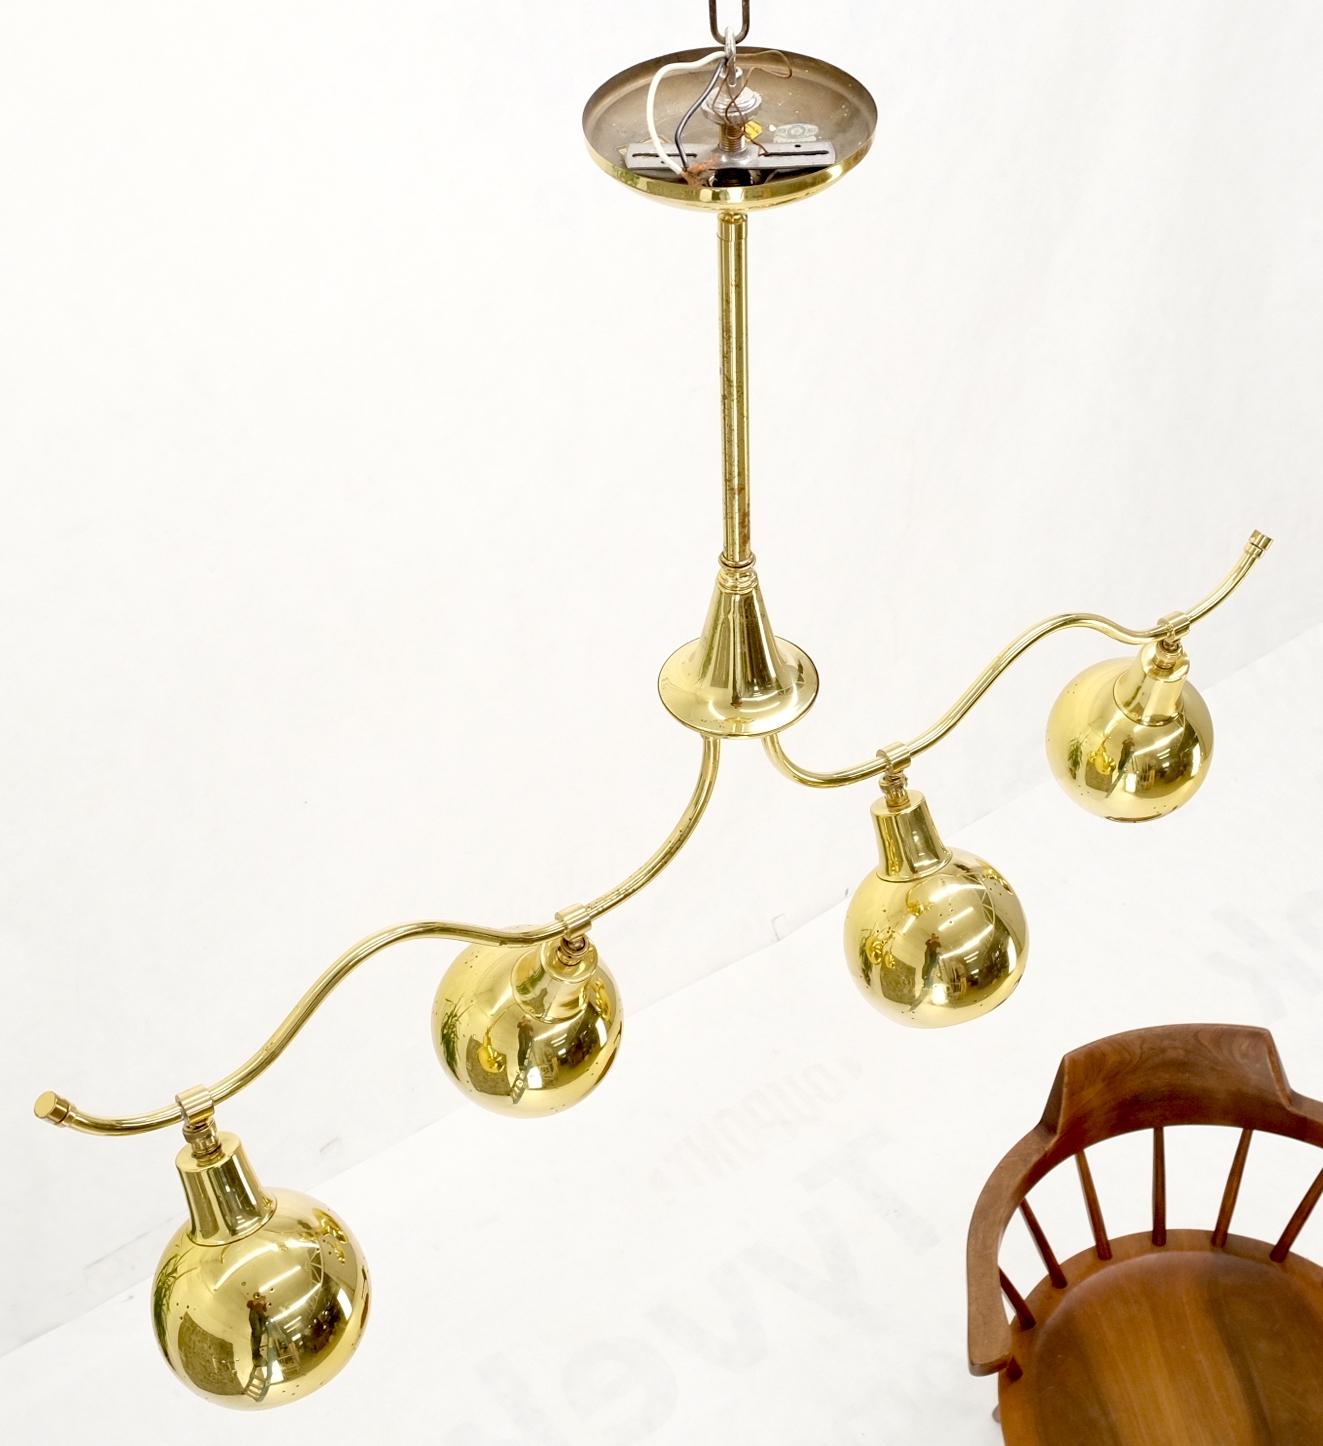 Solid polished brass ball pear shape shades light bar pool table fixture chandelier.
Adjustable shades.